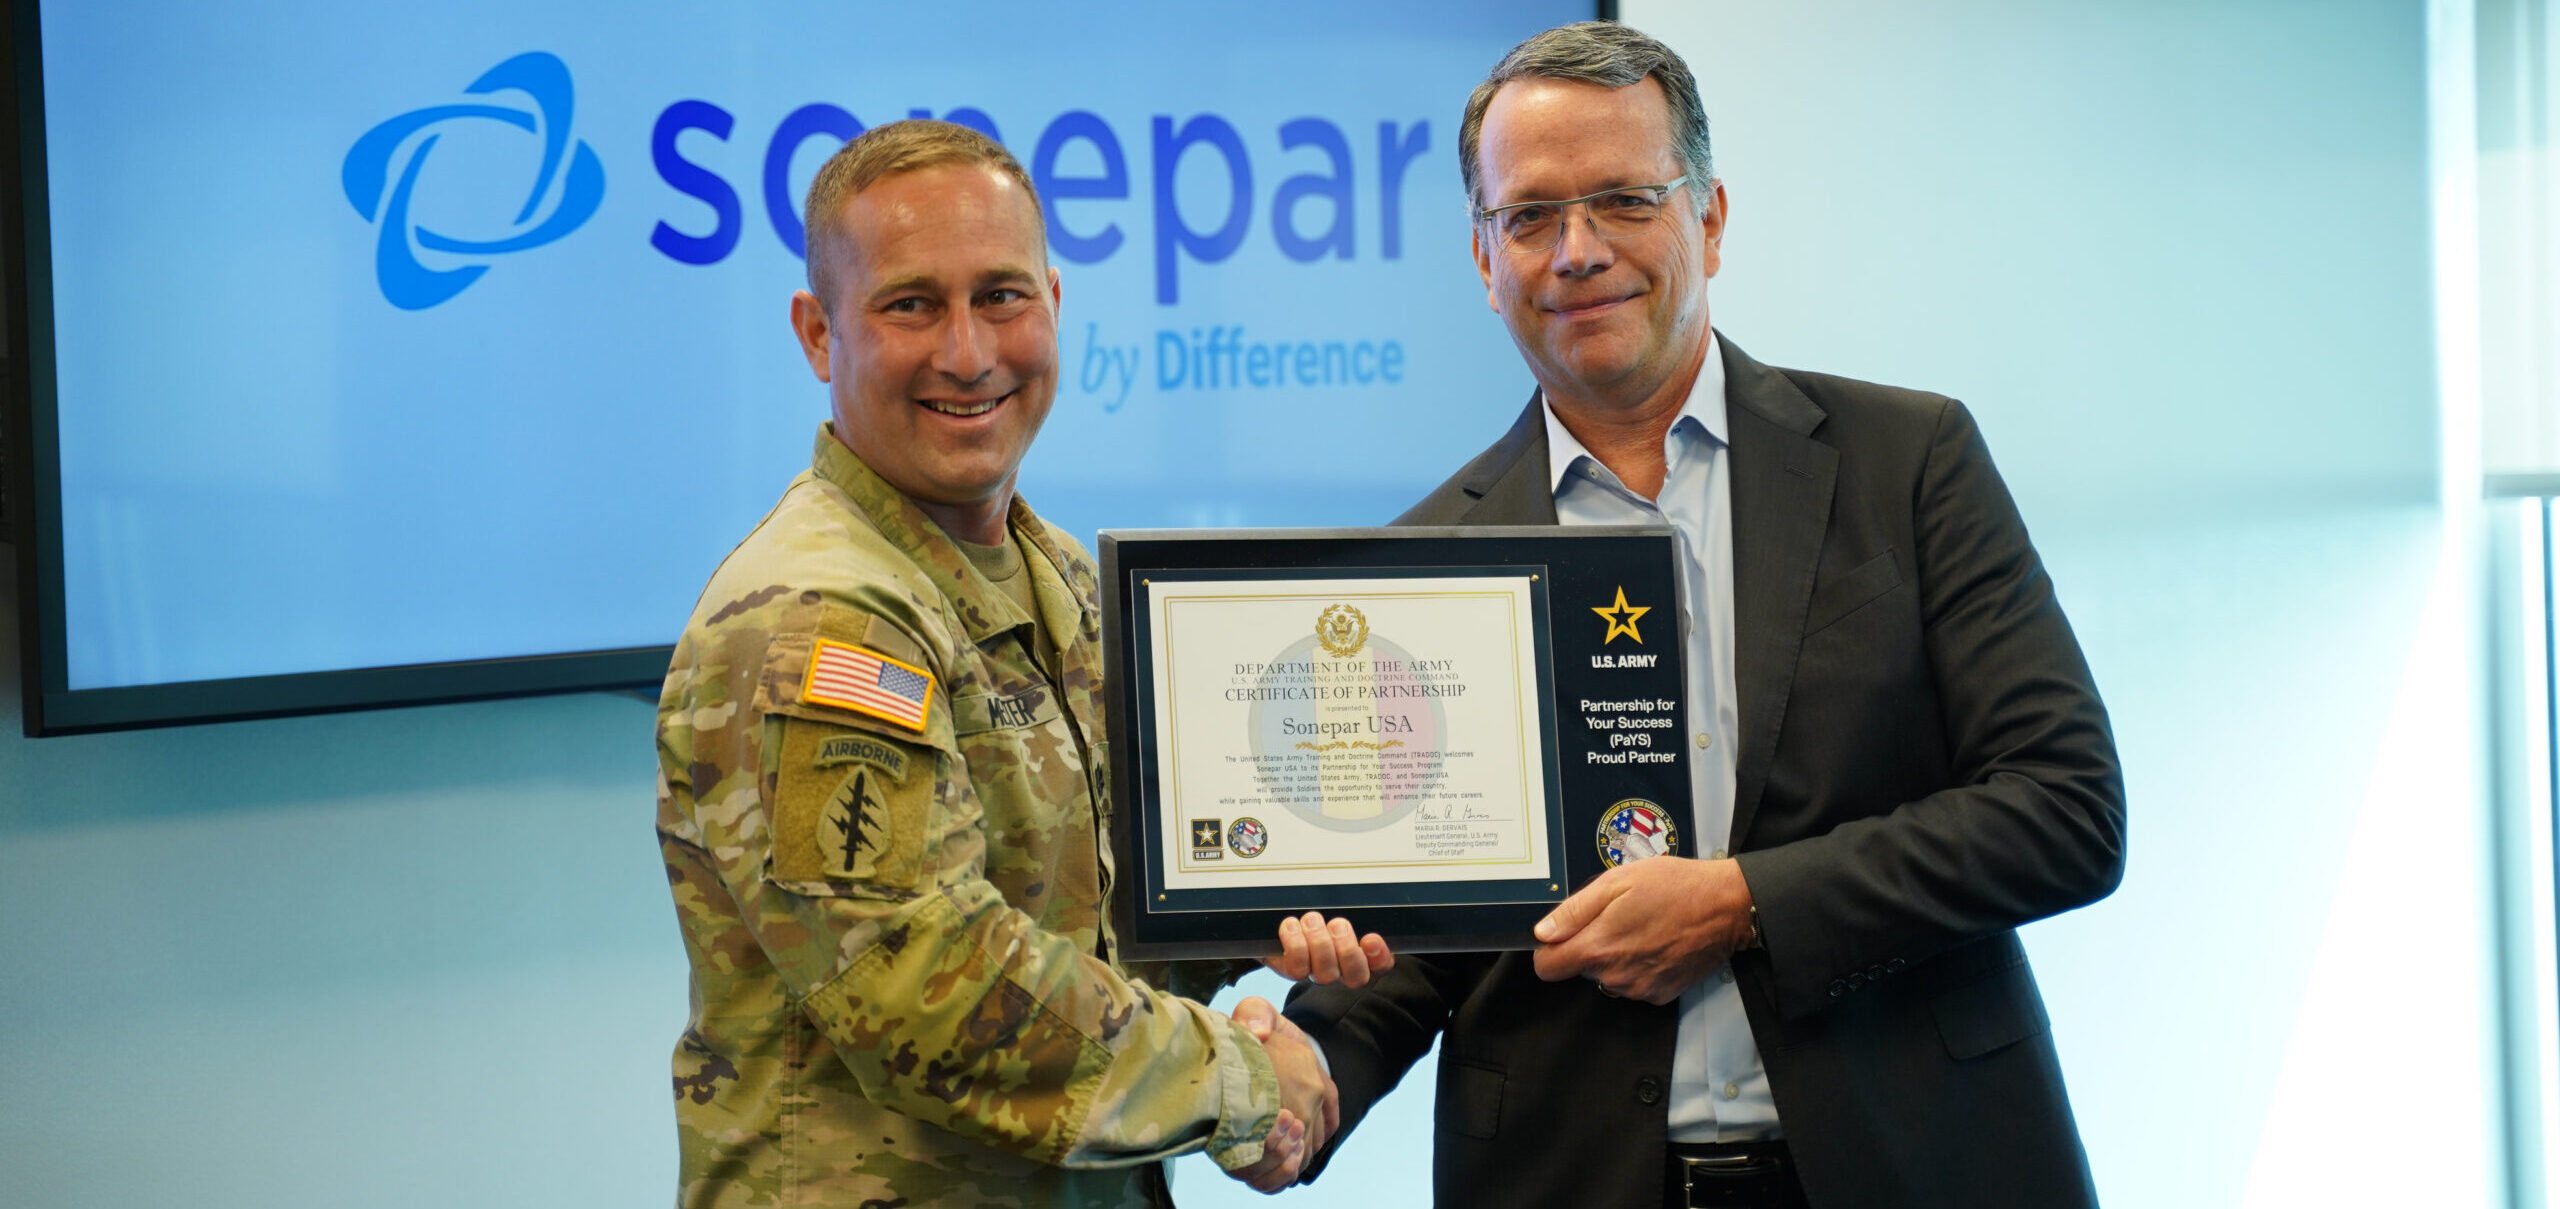 Right to left: Rob Taylor, President of Sonepar North America, and Colonel Meister